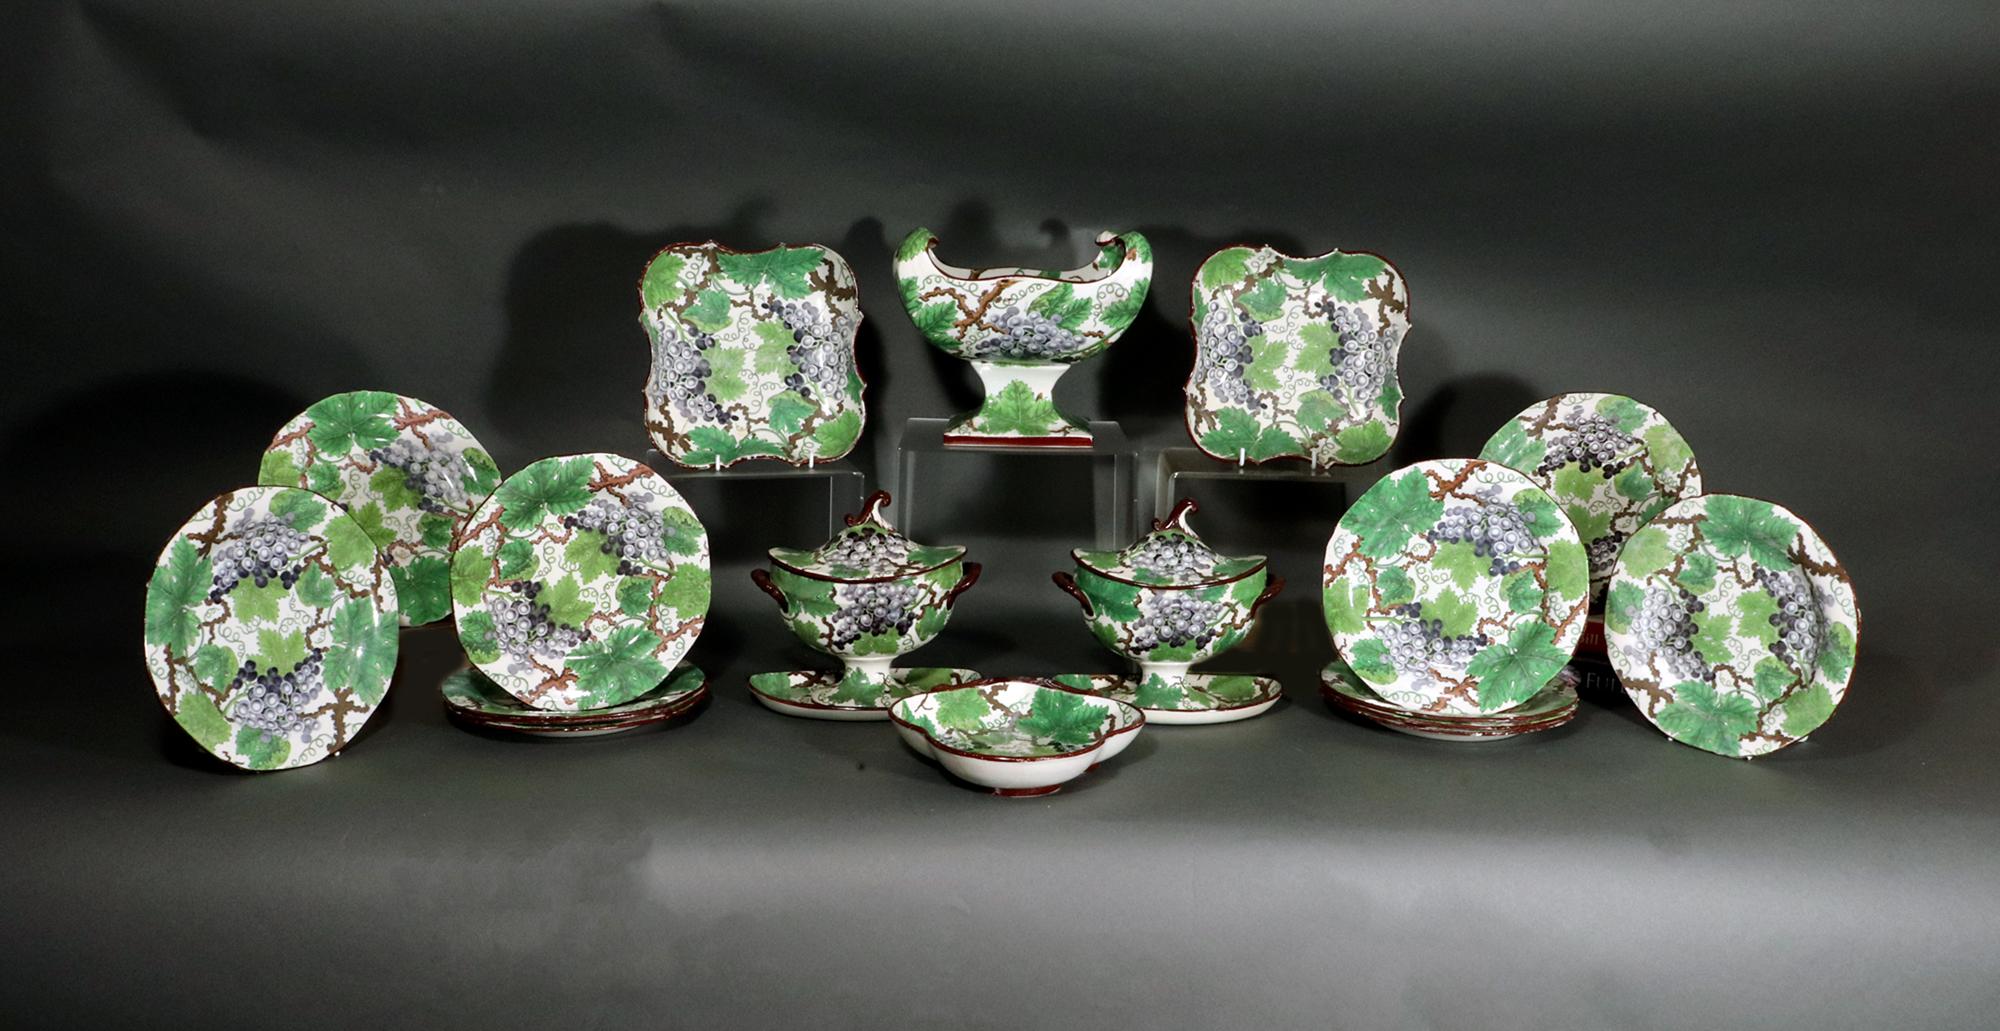 Pearlware Dessert Service with Grapes & Vines,
Probably Davenport,
Circa 1810-20

The seventeen piece Spode pearlware dessert service is printed in a light blue and the leaves are painted in shades of green and brown with fruiting grapevine.  Each